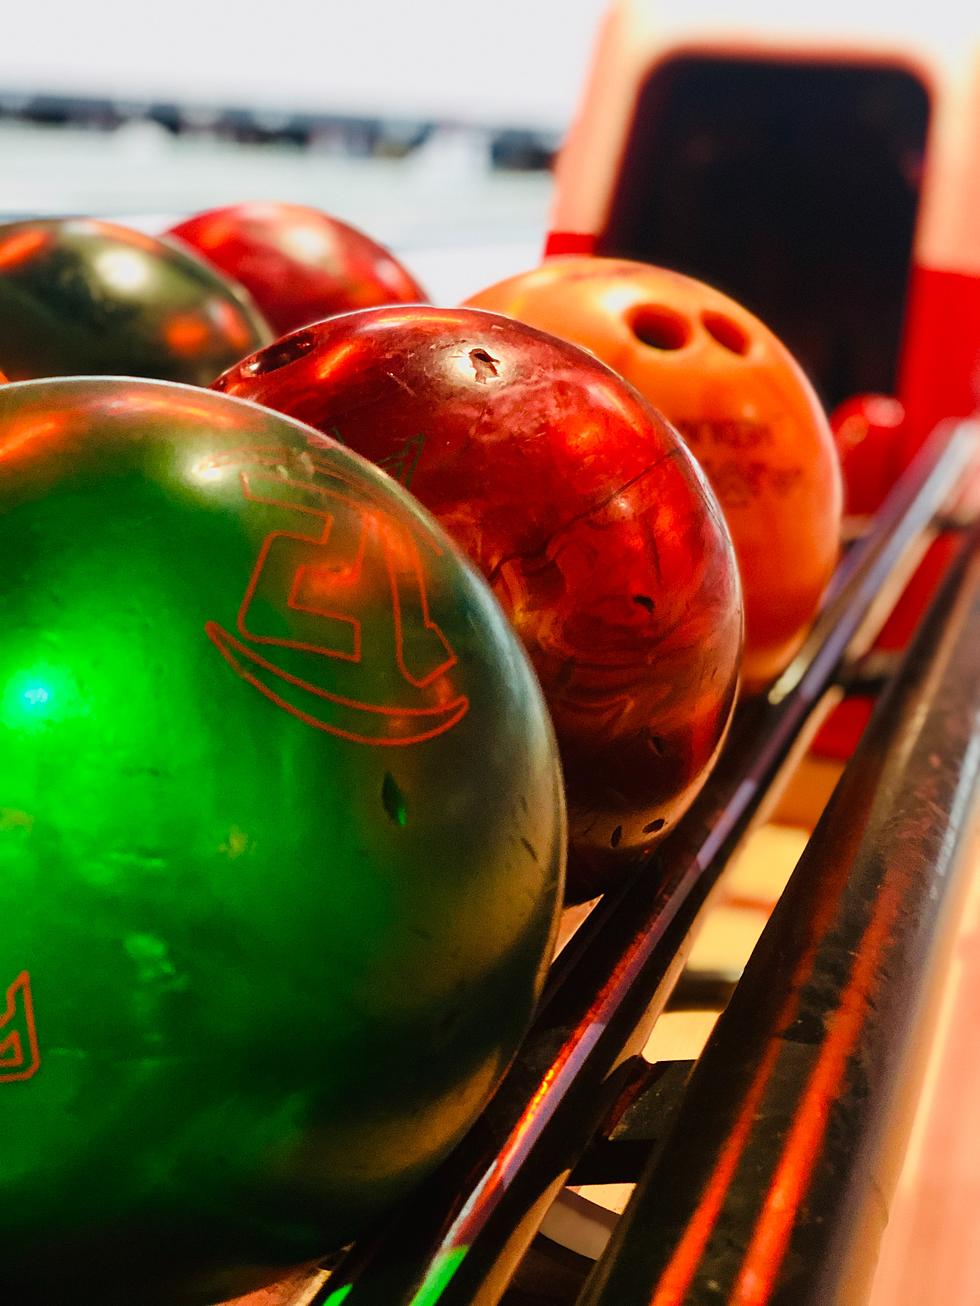 It May Still Be Cold Outside, But it’s Cozy Warm at the Bowling Alley